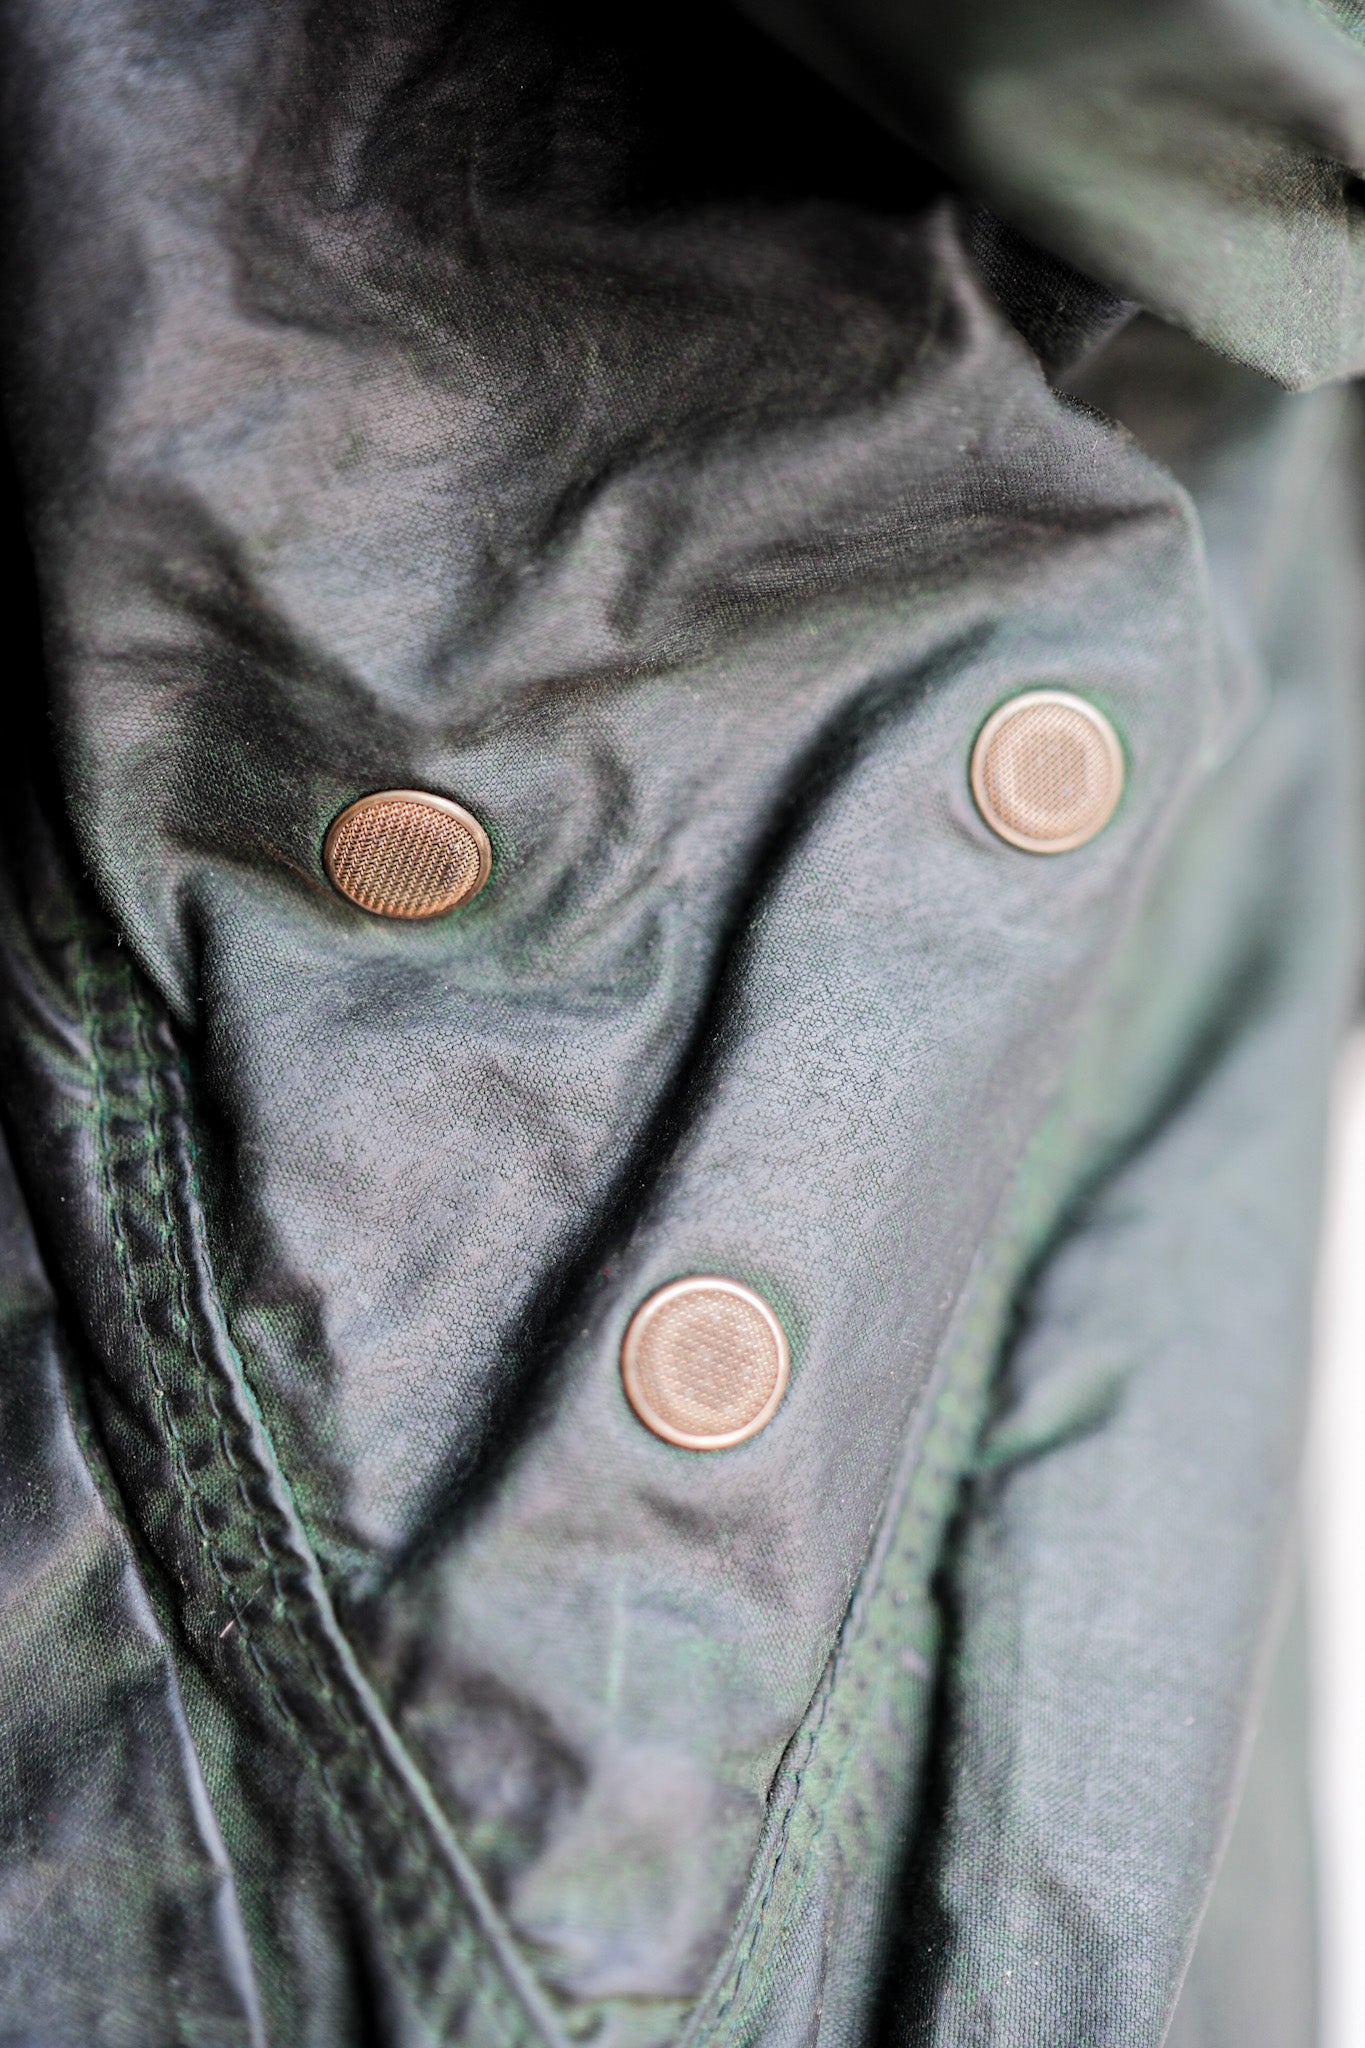 【~60's】Vintage Belstaff Green Waxed Jacket With Patches Size.36 “TRIALMASTER"